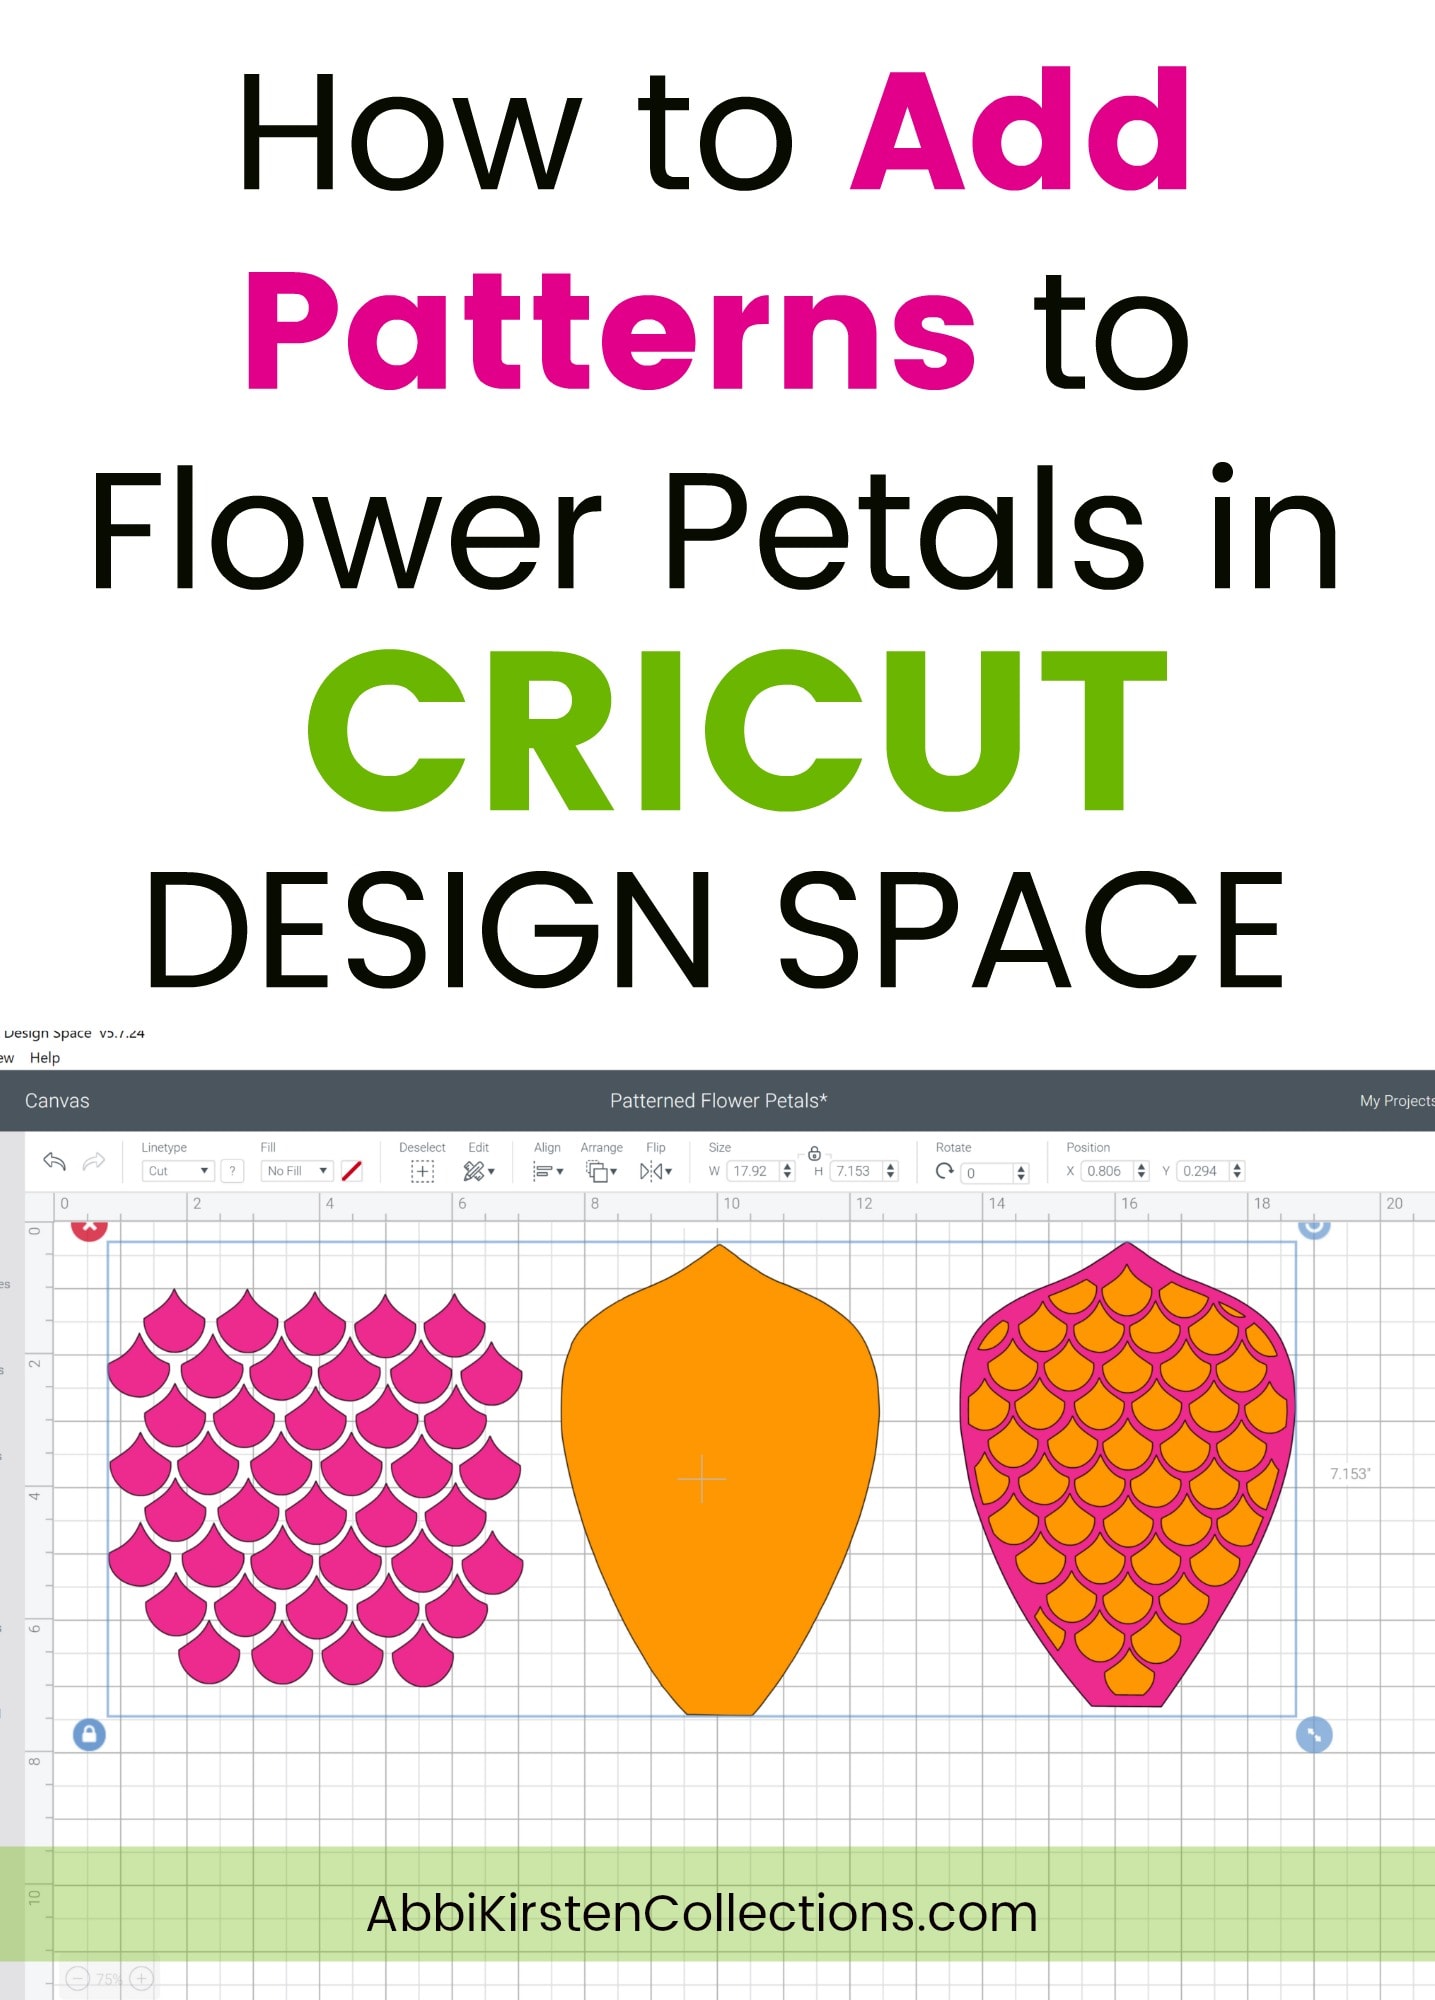 A screenshot of Cricut Design Space canvas with three different shaped graphics on the canvas grid. Pink mermaid scales, an orange flower petal, and a pink flower petal with orange scales. Image text reads, "how to add patterns to flower petals in Cricut Design Space"